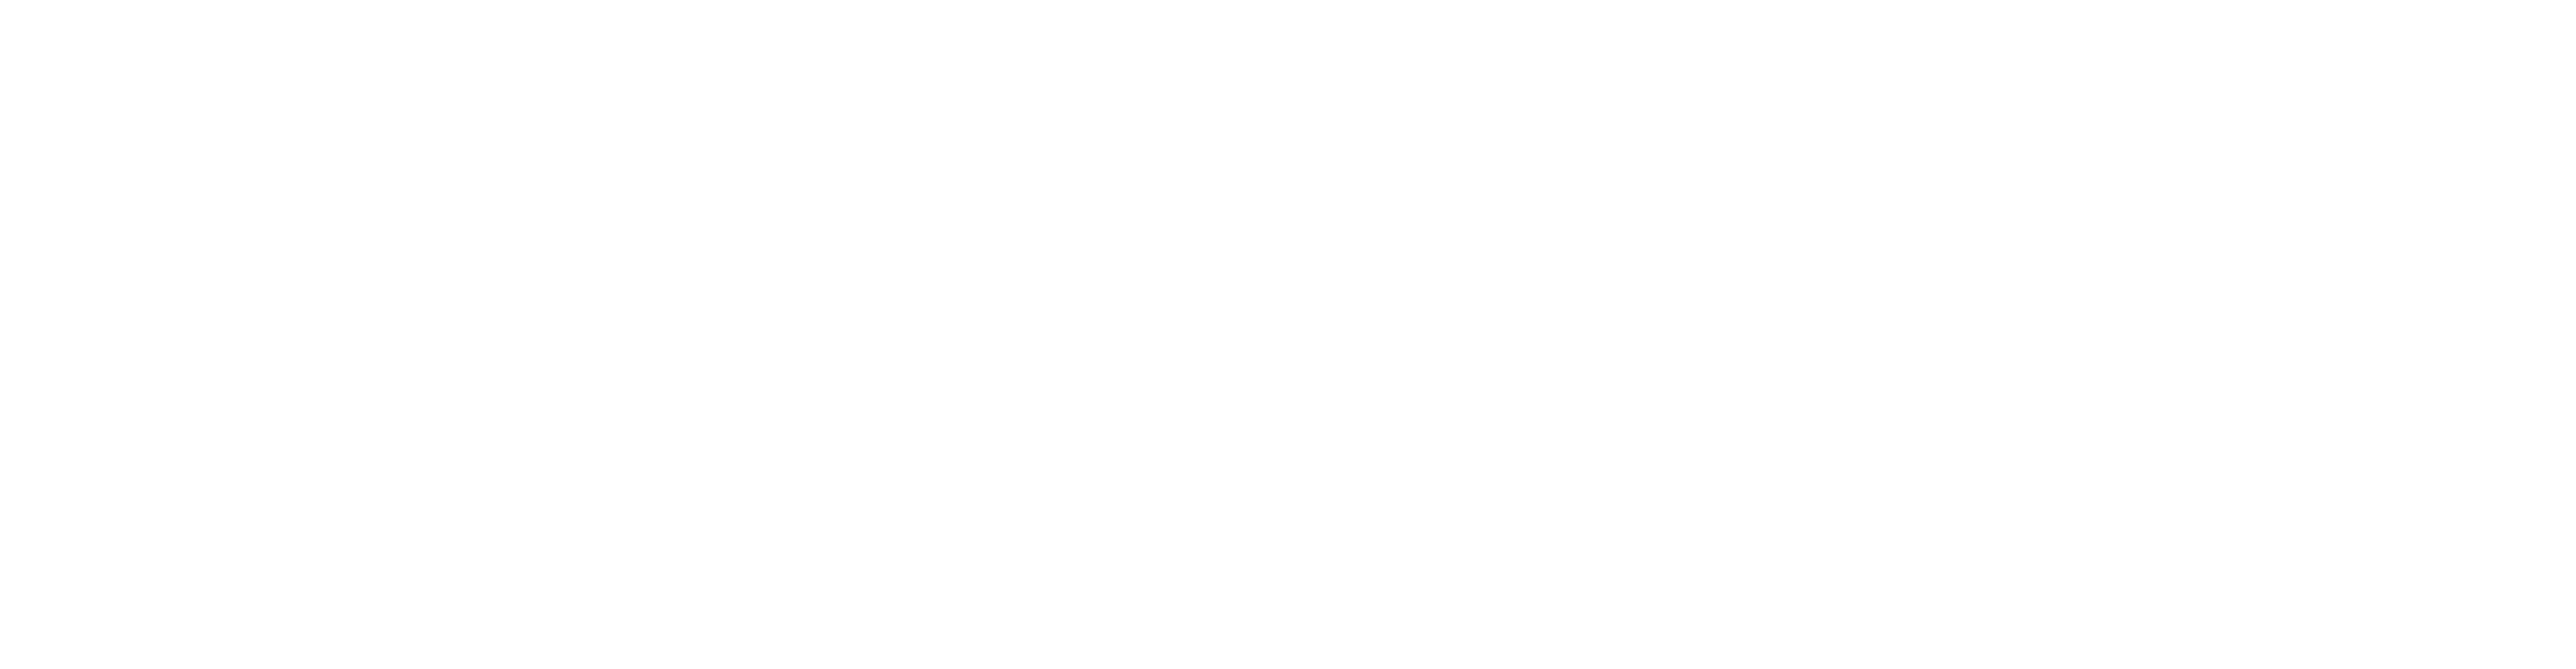 Boy Scouts of America - Chippewa Valley Council Logo